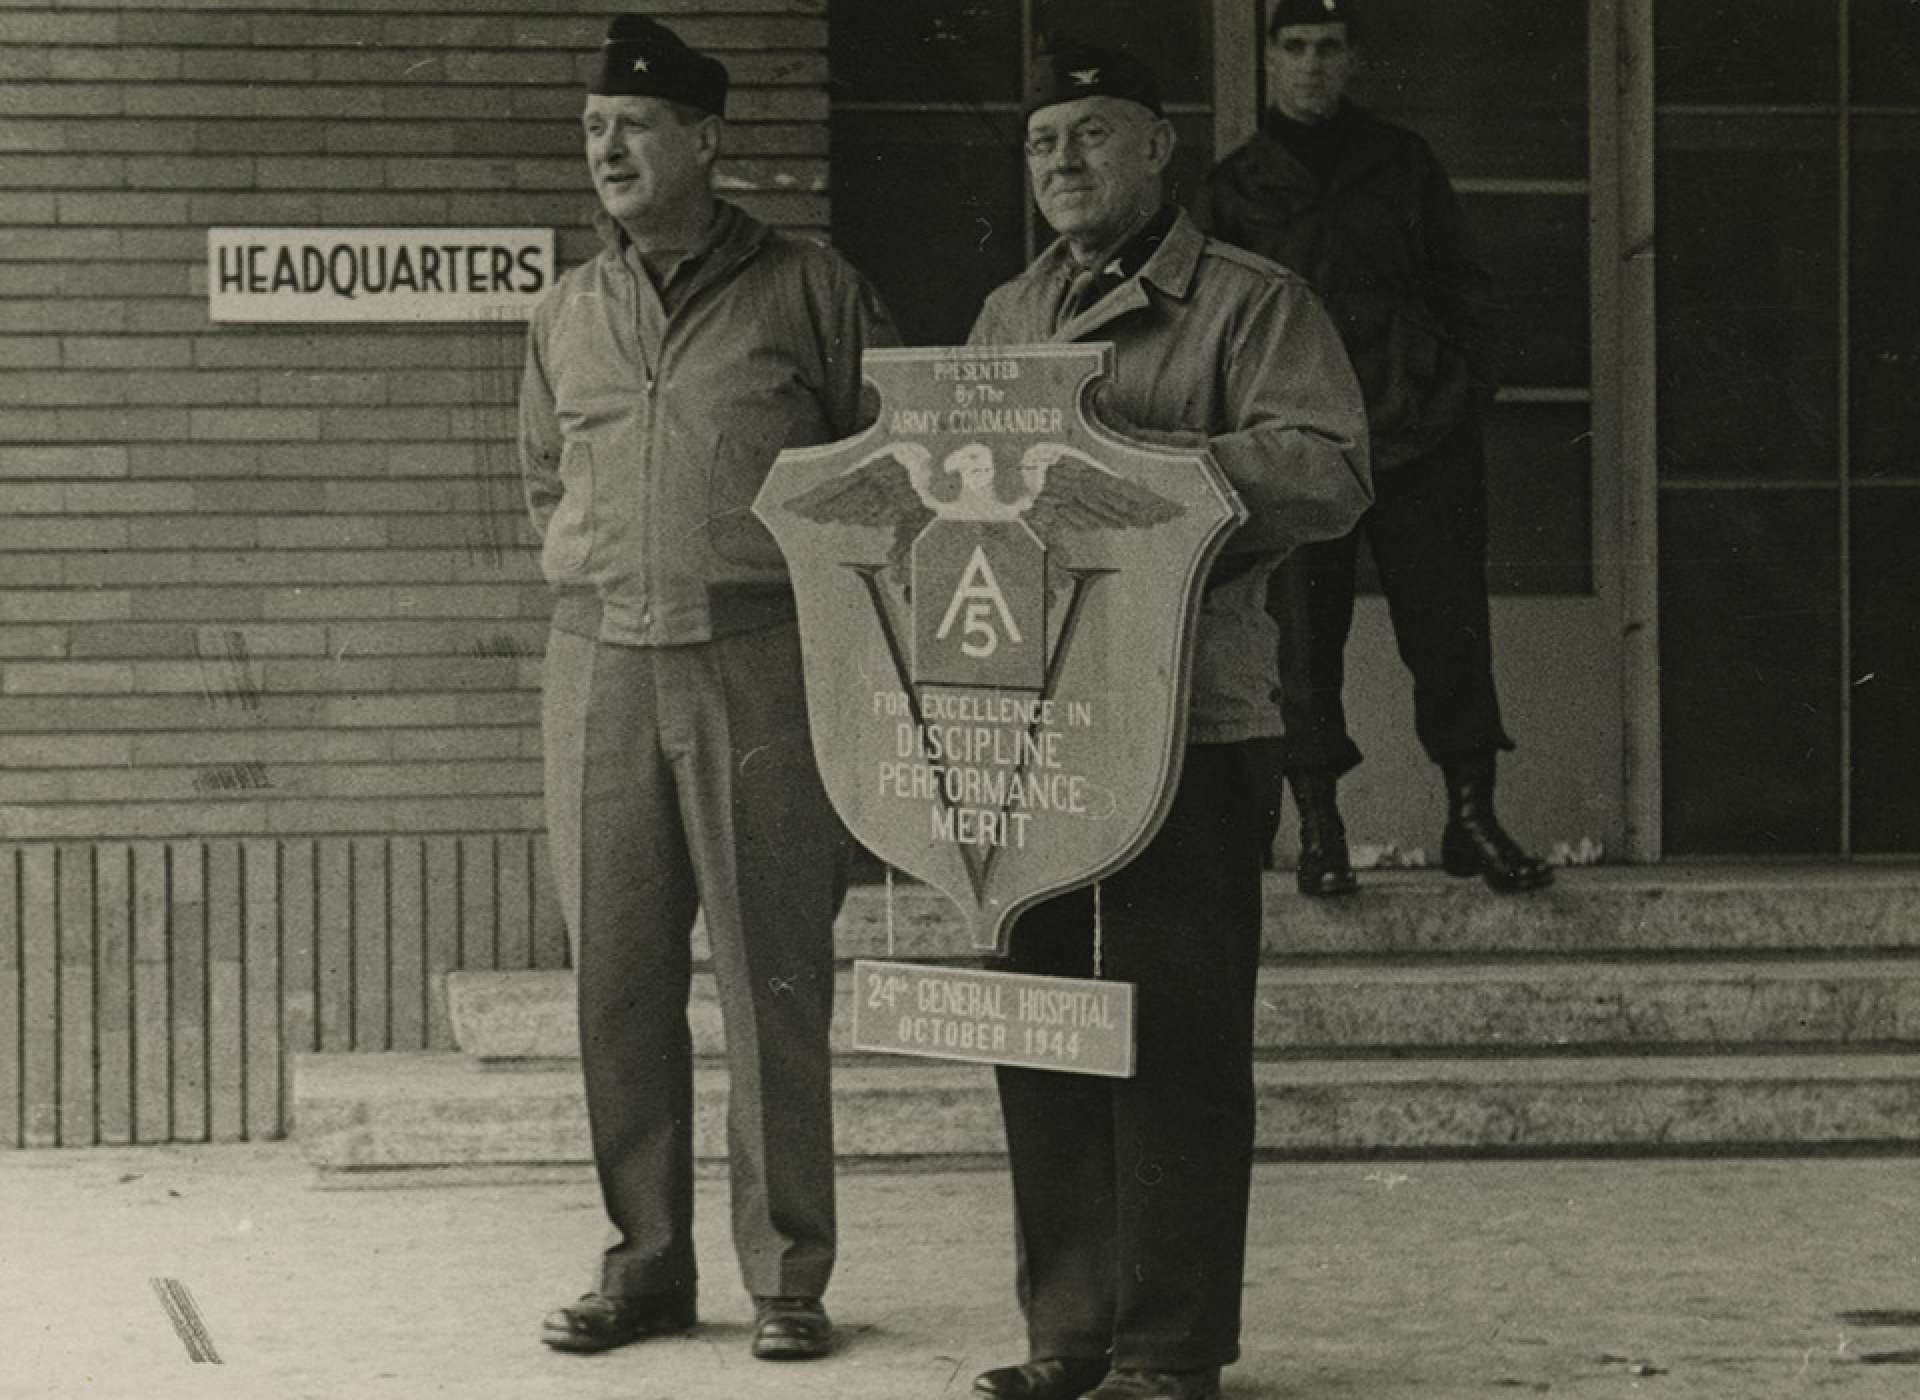 Colonel Walter Clifton Royals, Commanding Officer of the 24th General Hospital and Tulane doctor holds a plaque awarded to the Tulane Unit for their distinguished service to the 5th Army in Italy. The National WWII Museum.